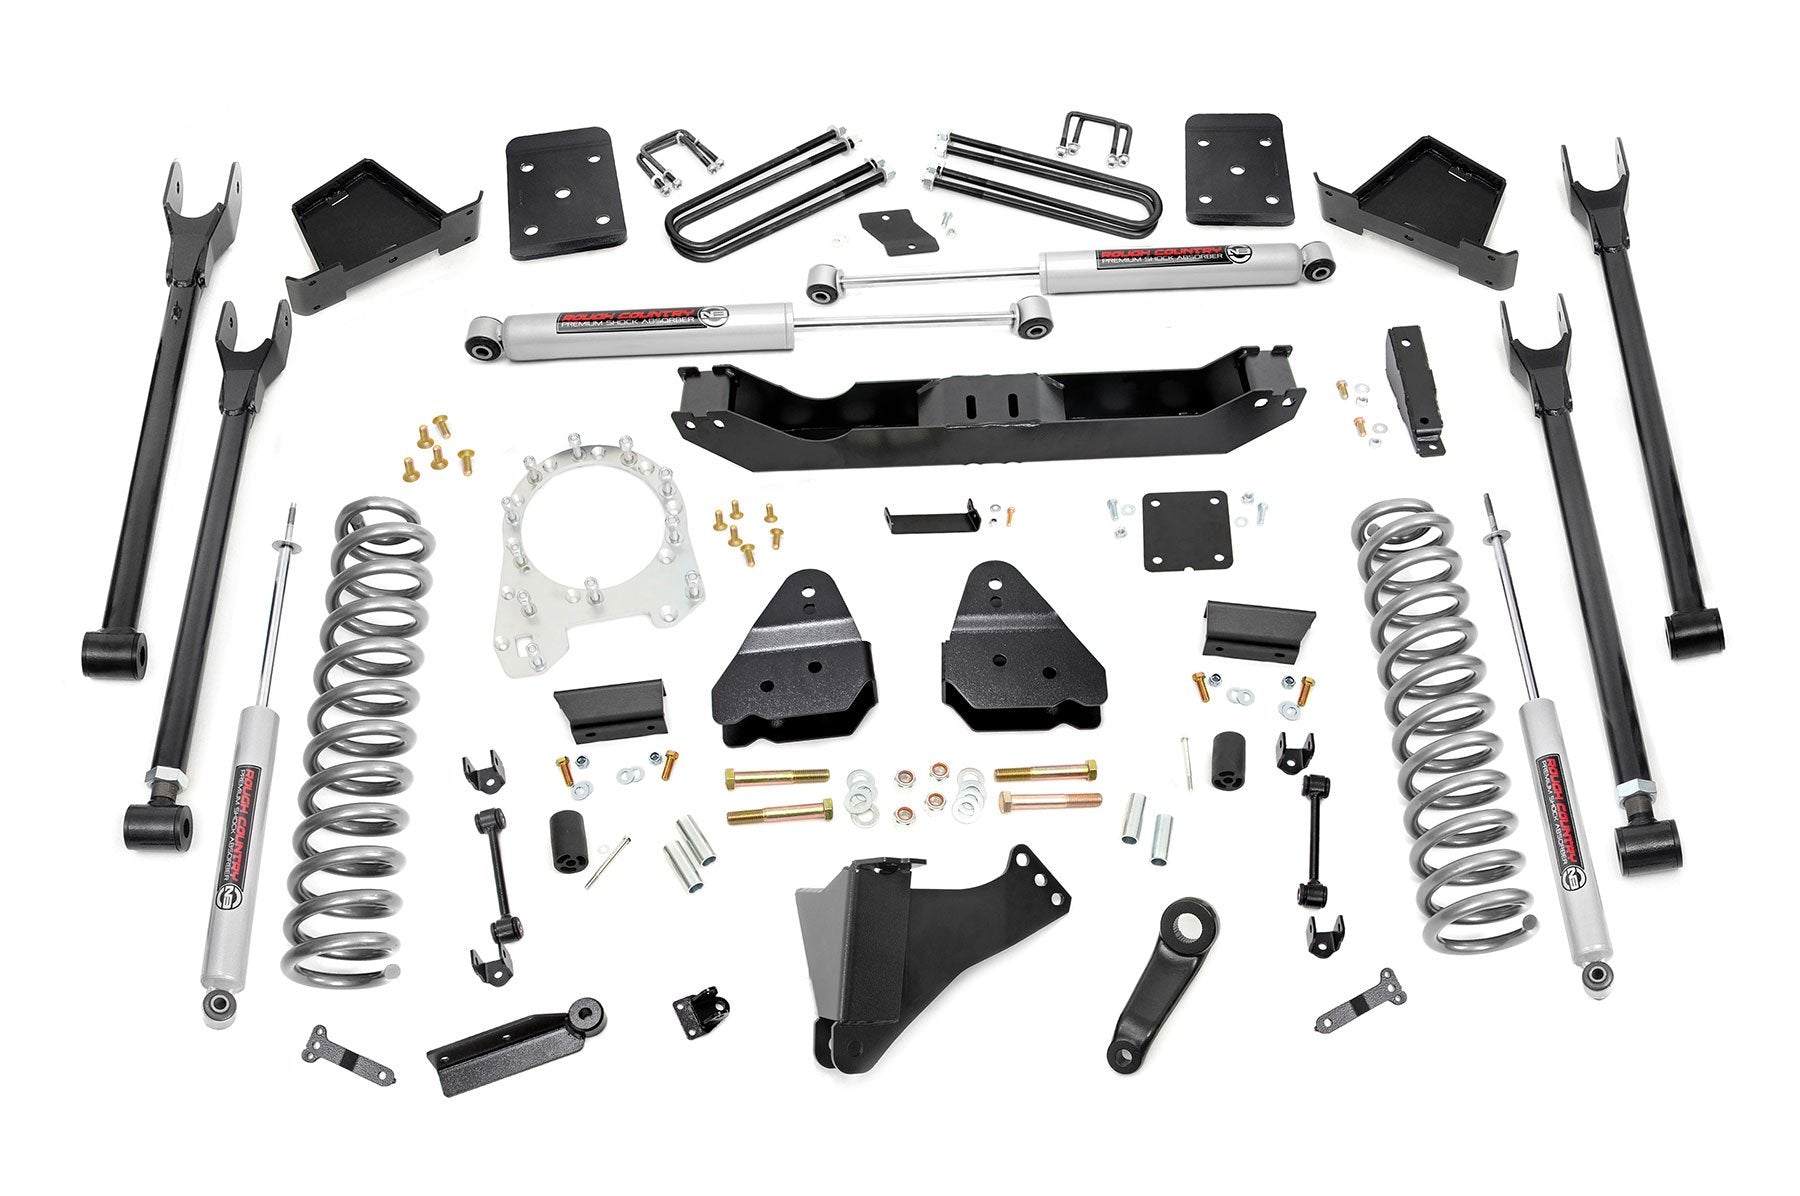 Rough Country 6 Inch Lift Kit | 4-Link | No OVLD | Ford F-250/F-350 Super Duty 4WD (17-22)